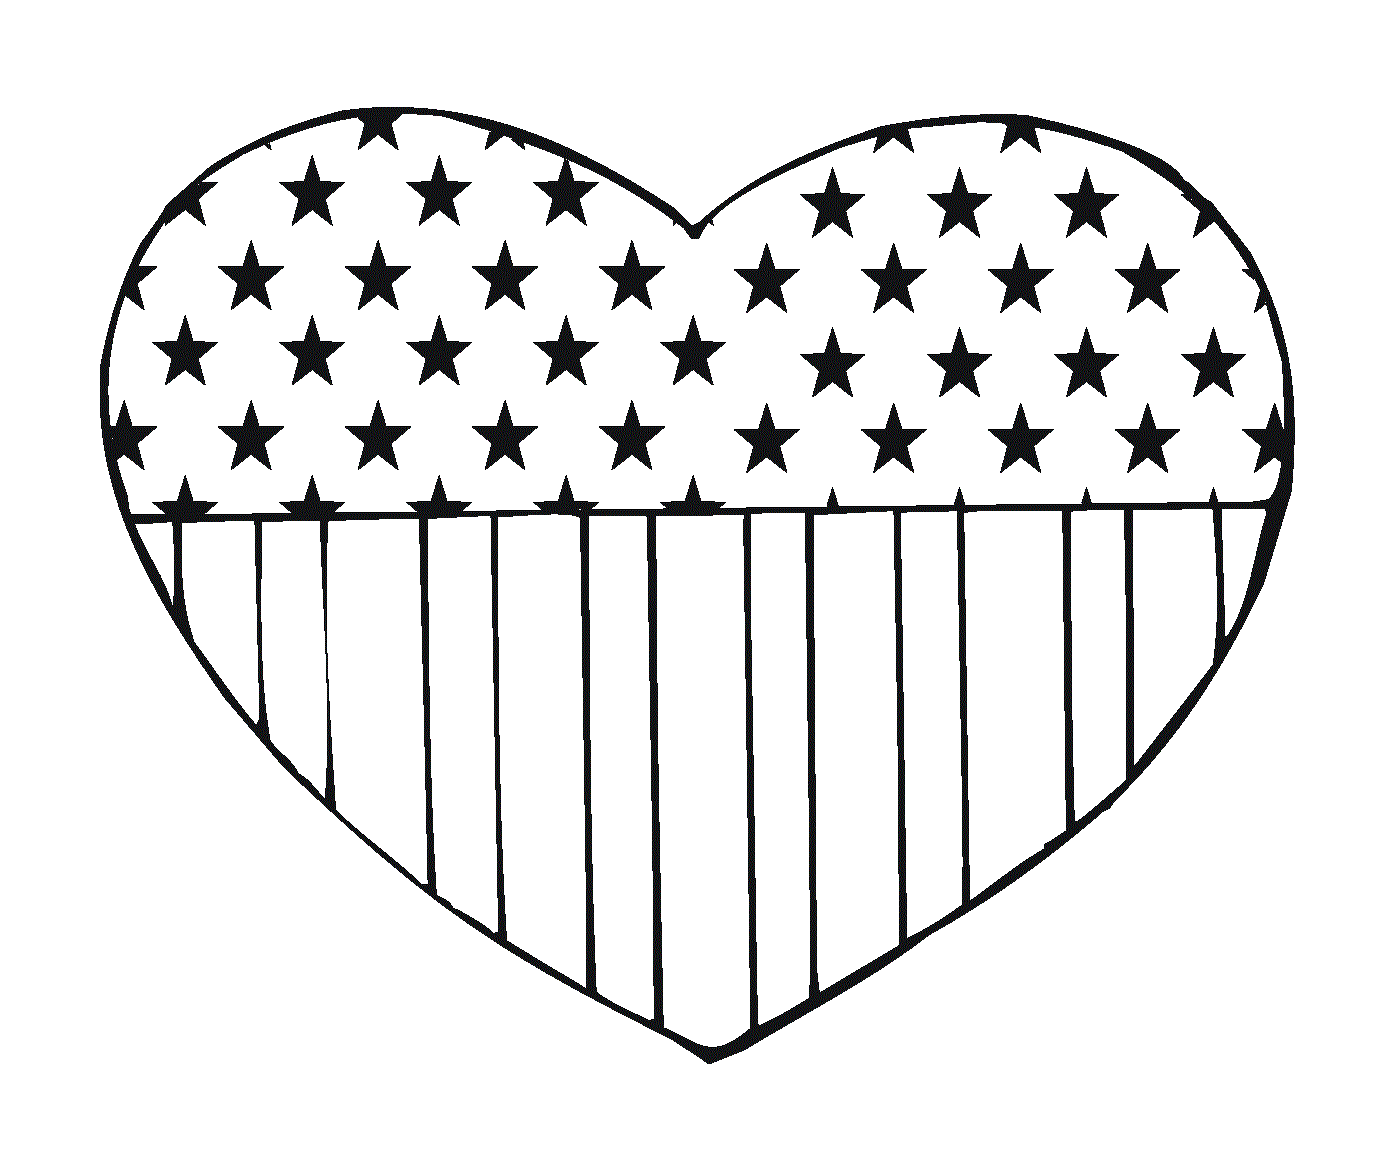  Heart with the flag of the United States 